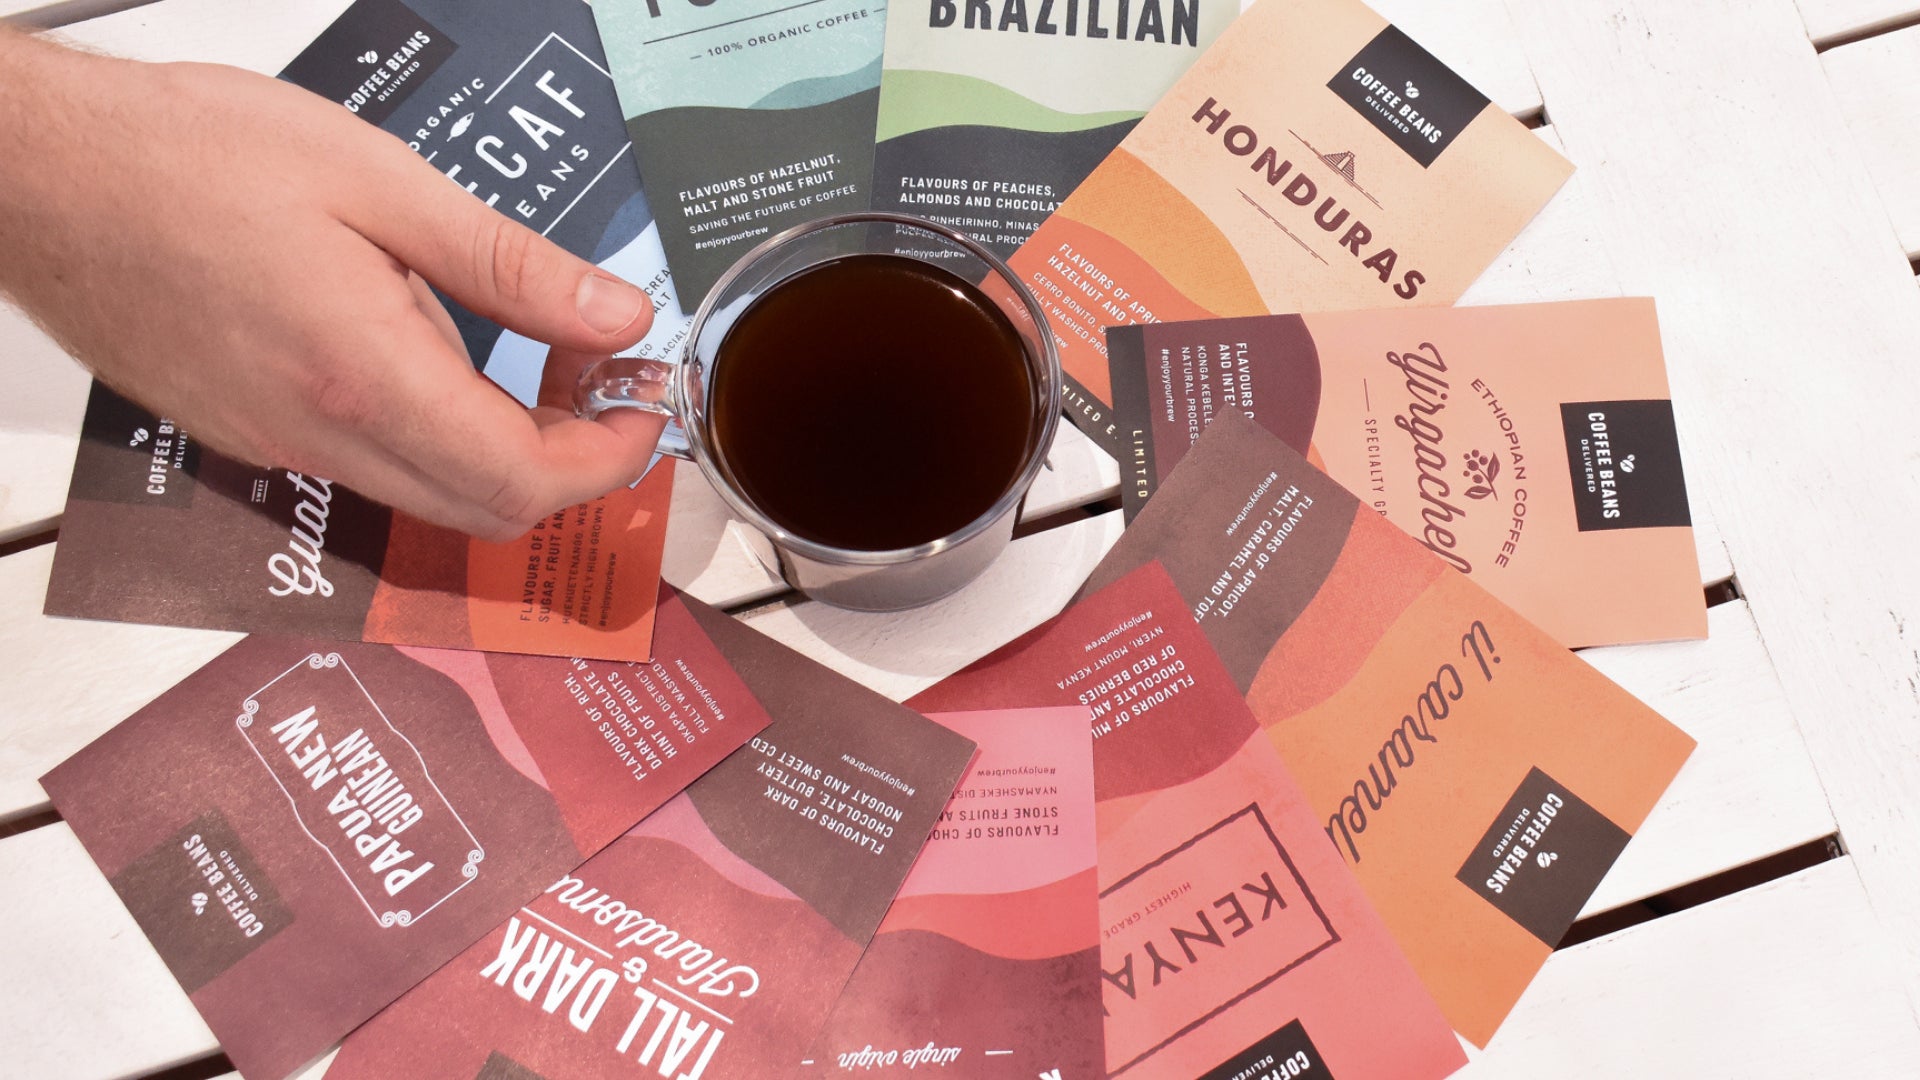 A black espresso coffee sits in the middle of a circle of colourful coffee single origin labels with a male hand reaching for the coffee